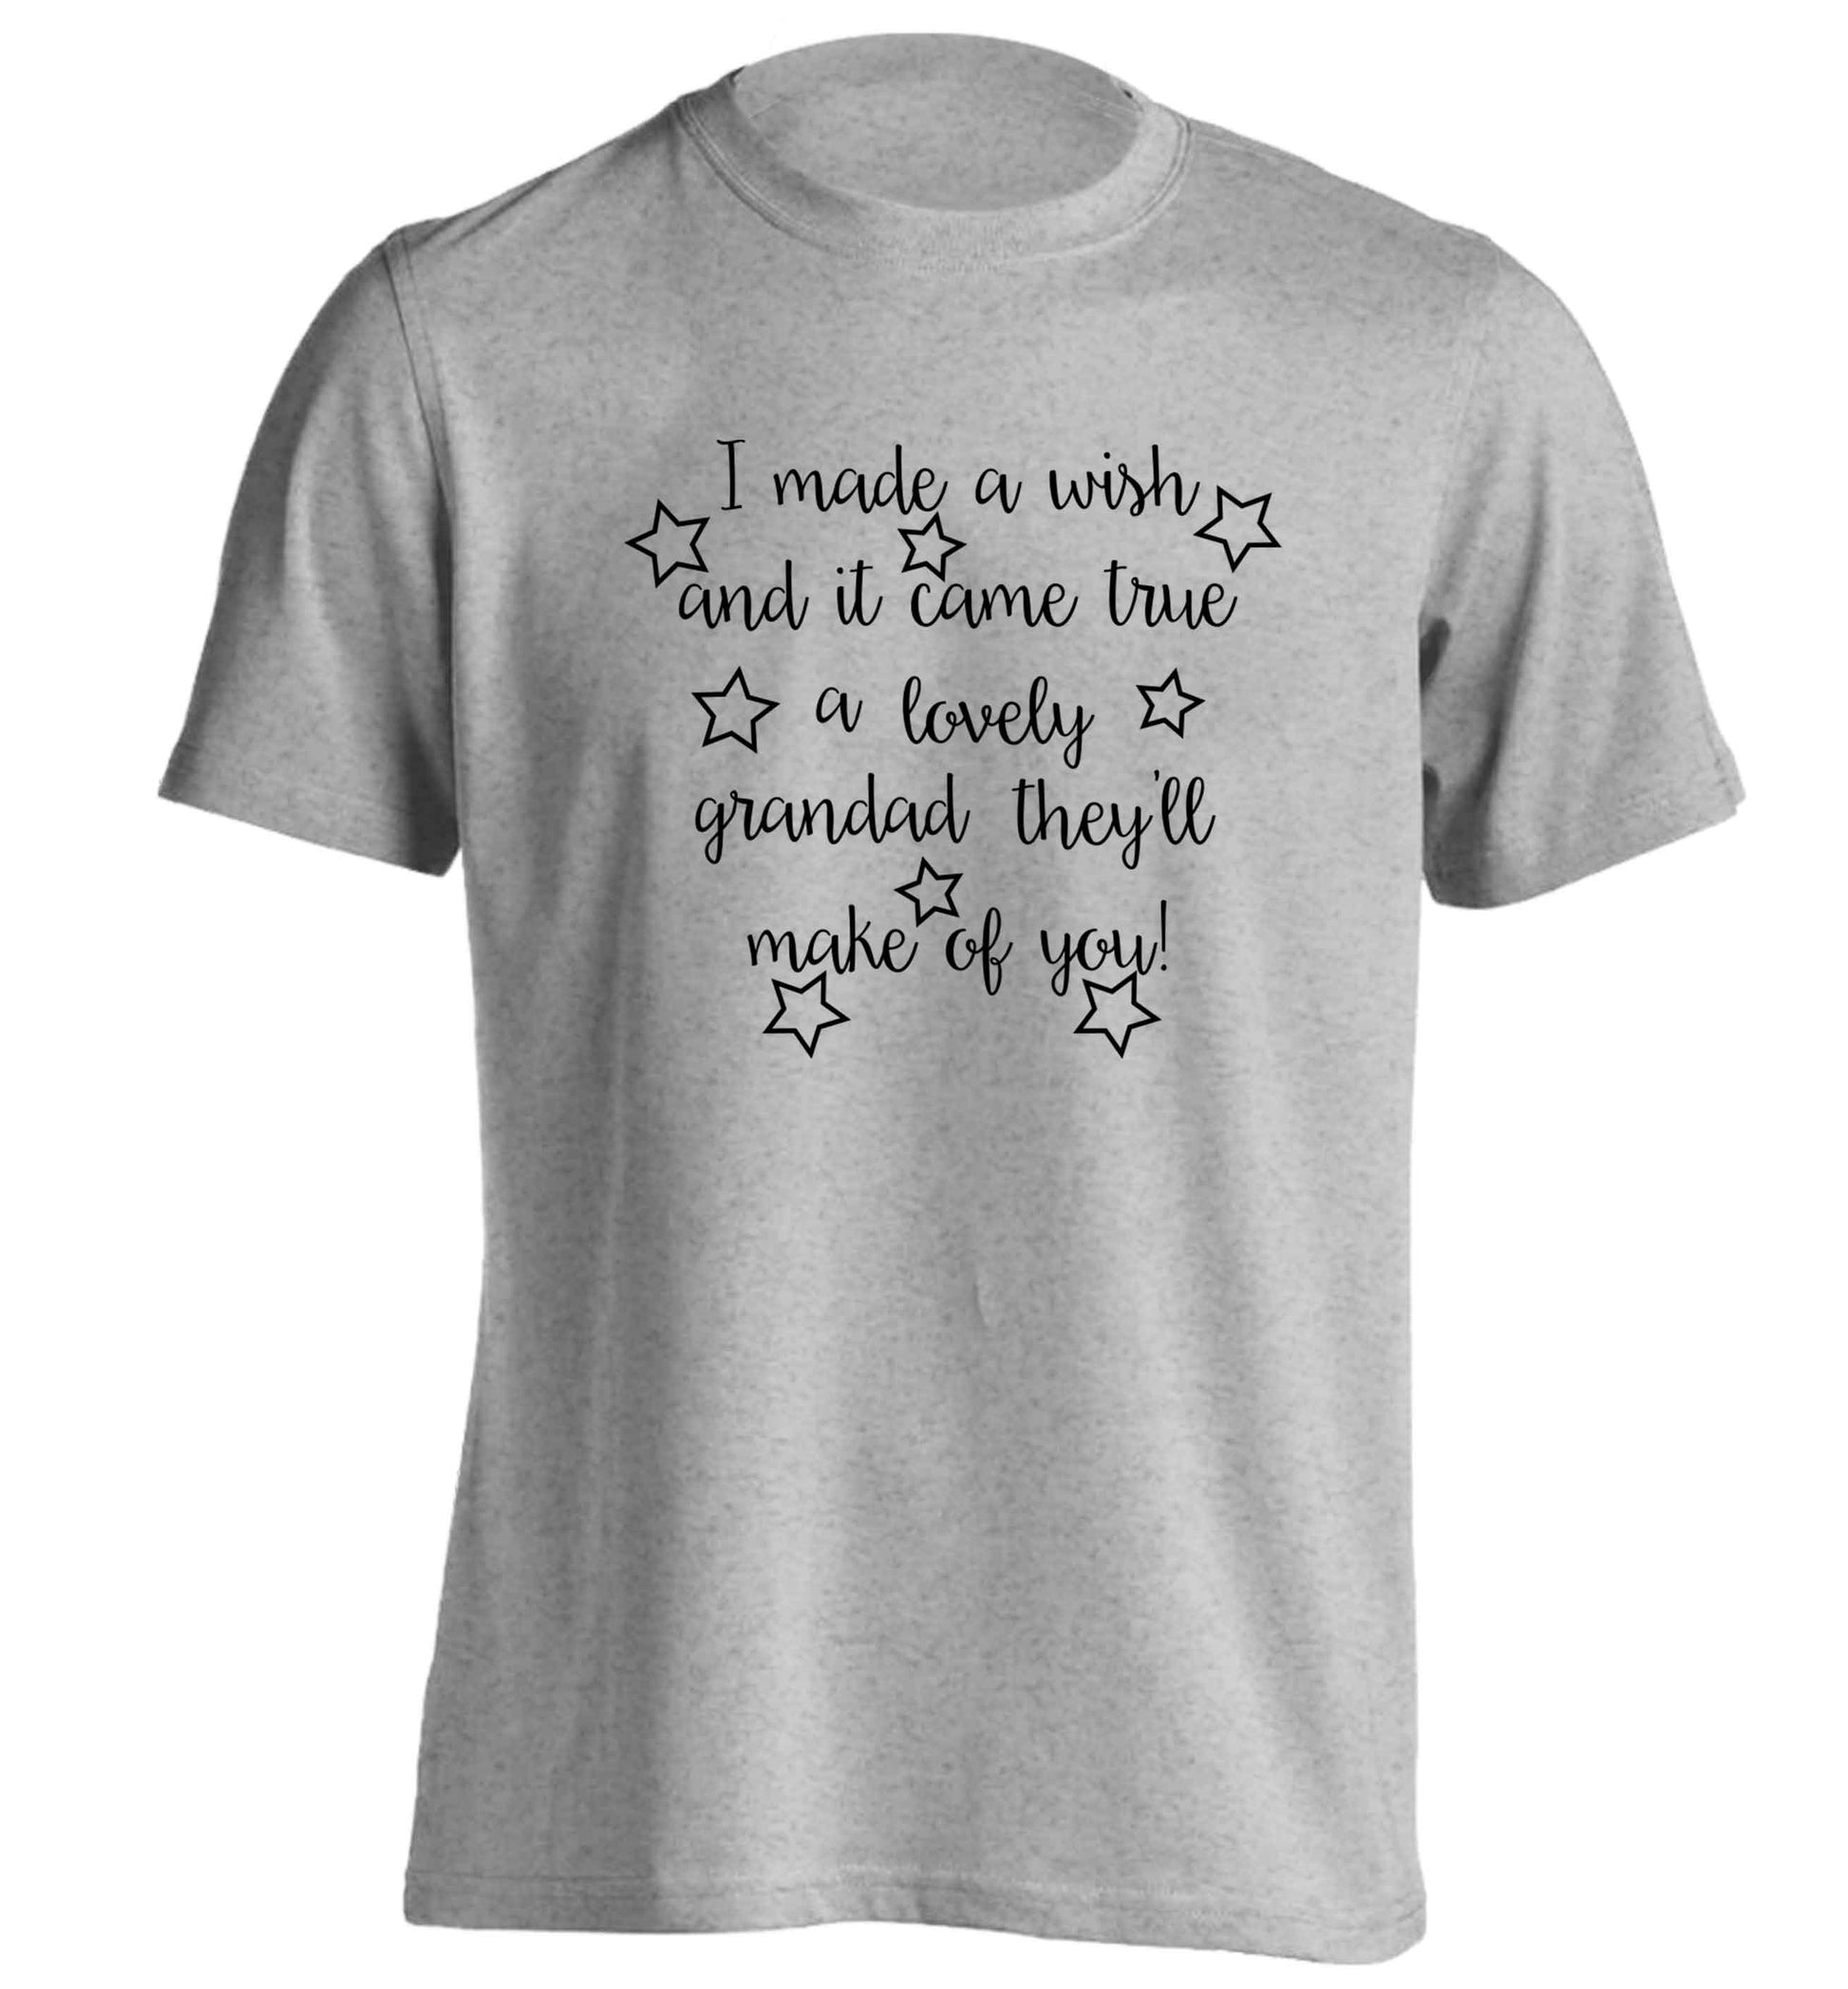 I made a wish and it came true a lovely grandad they'll make of you! adults unisex grey Tshirt 2XL